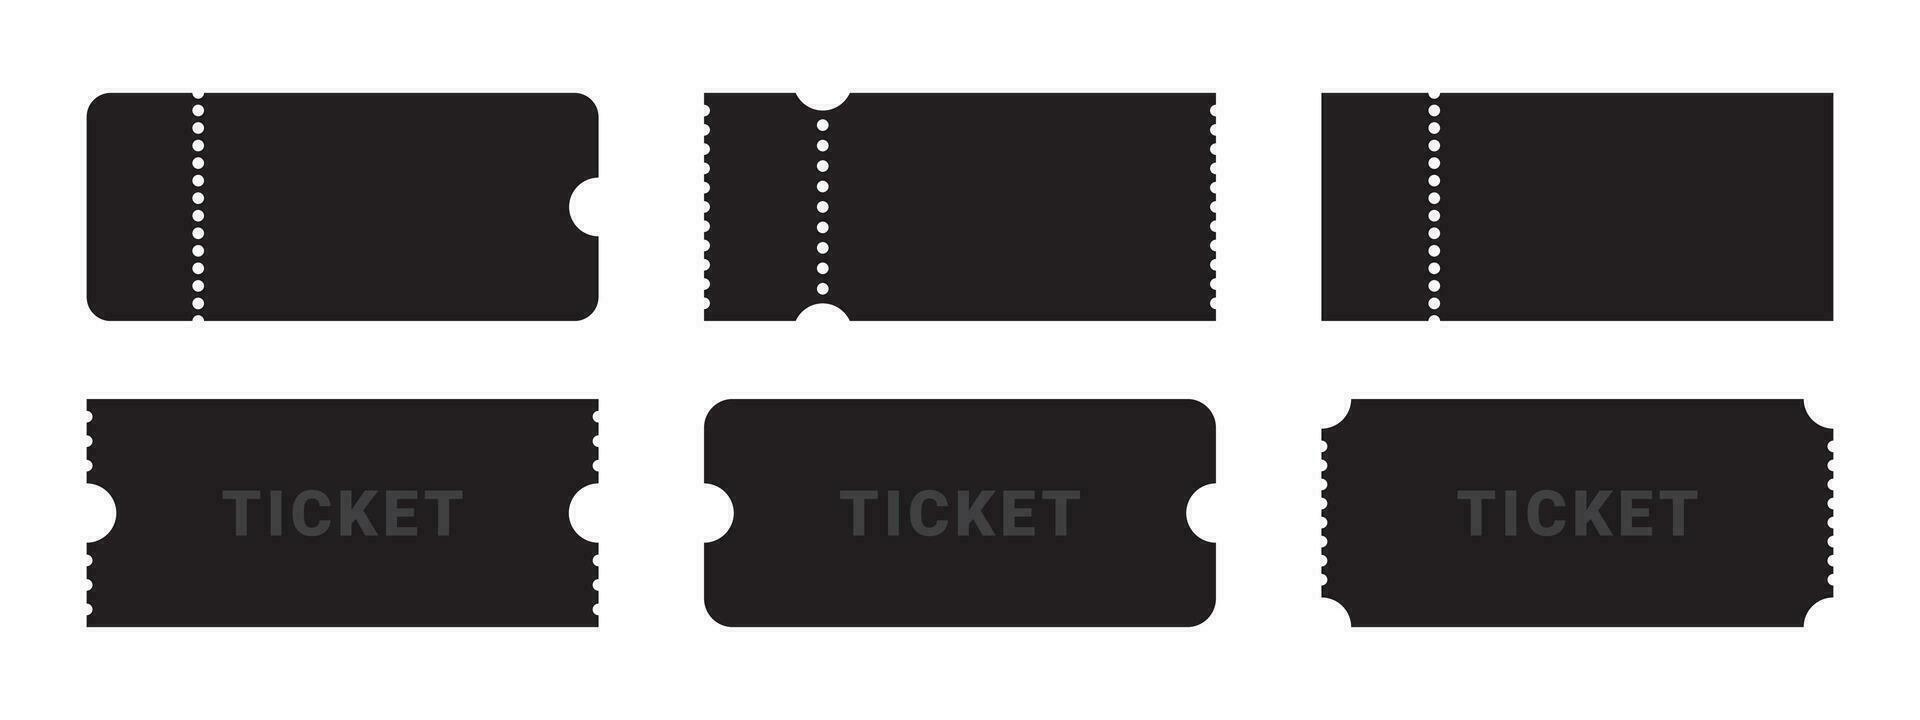 Blank tickets set. Black admission tickets. Coupons or tickets. Vector scalable graphics